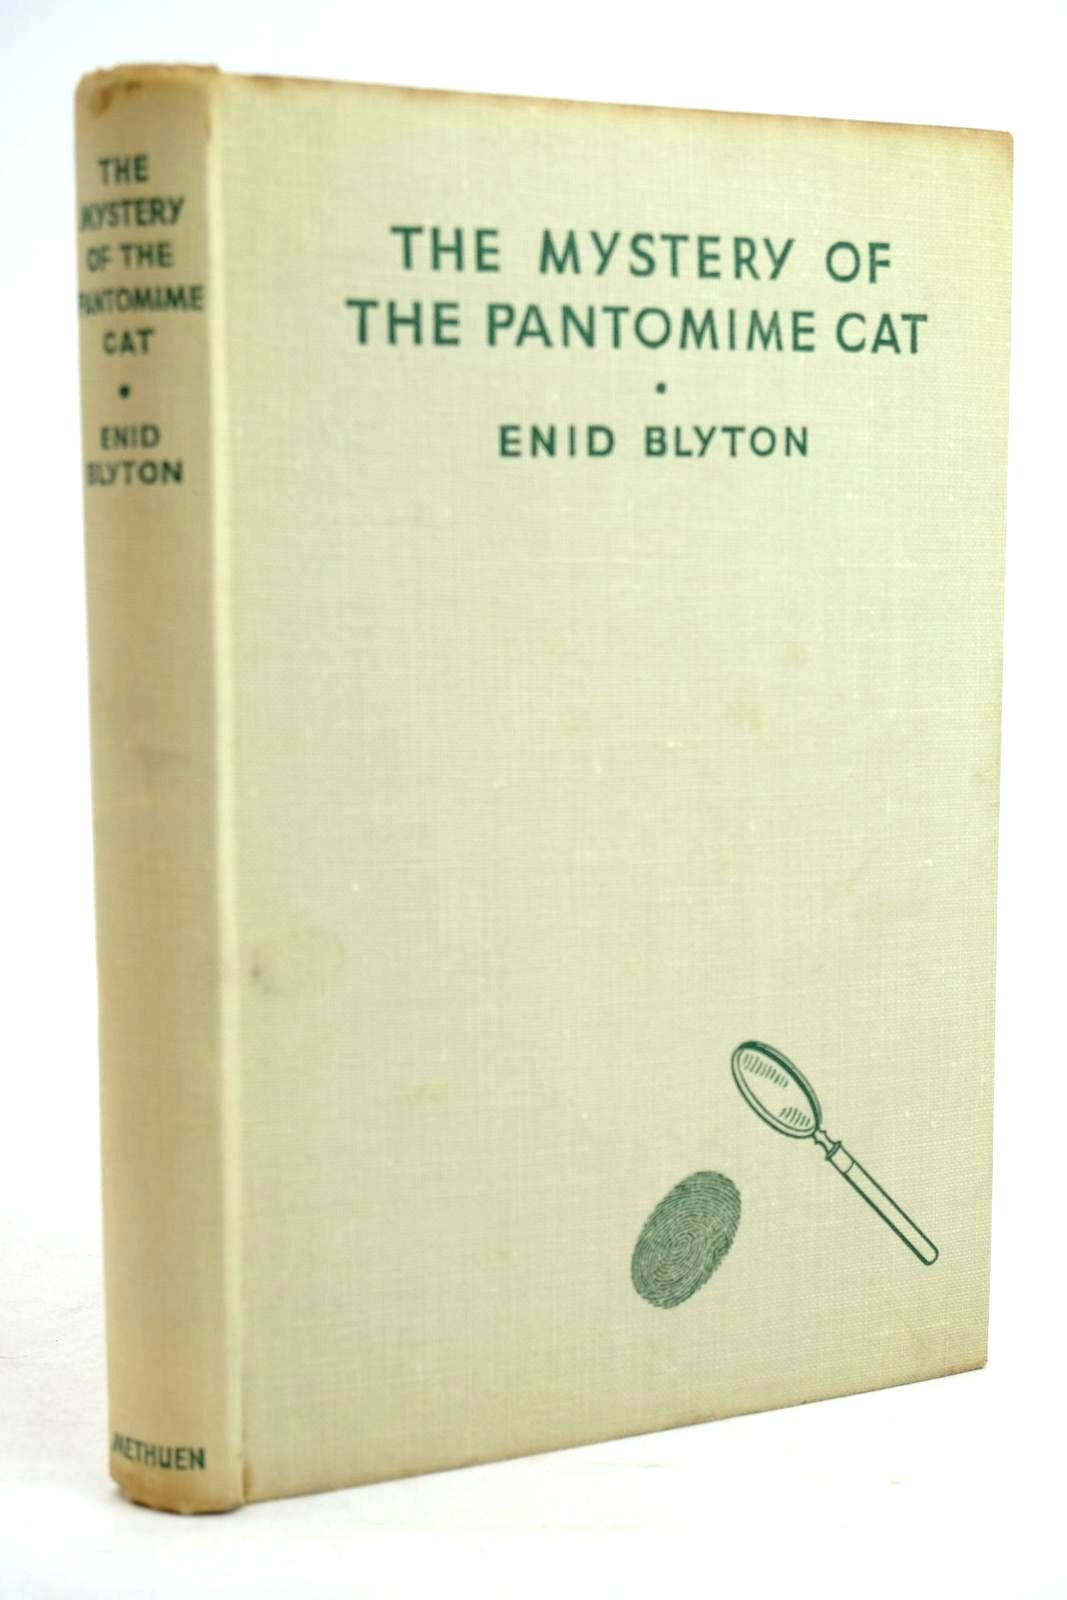 Photo of THE MYSTERY OF THE PANTOMIME CAT written by Blyton, Enid illustrated by Abbey, J. published by Methuen & Co. Ltd. (STOCK CODE: 1320314)  for sale by Stella & Rose's Books